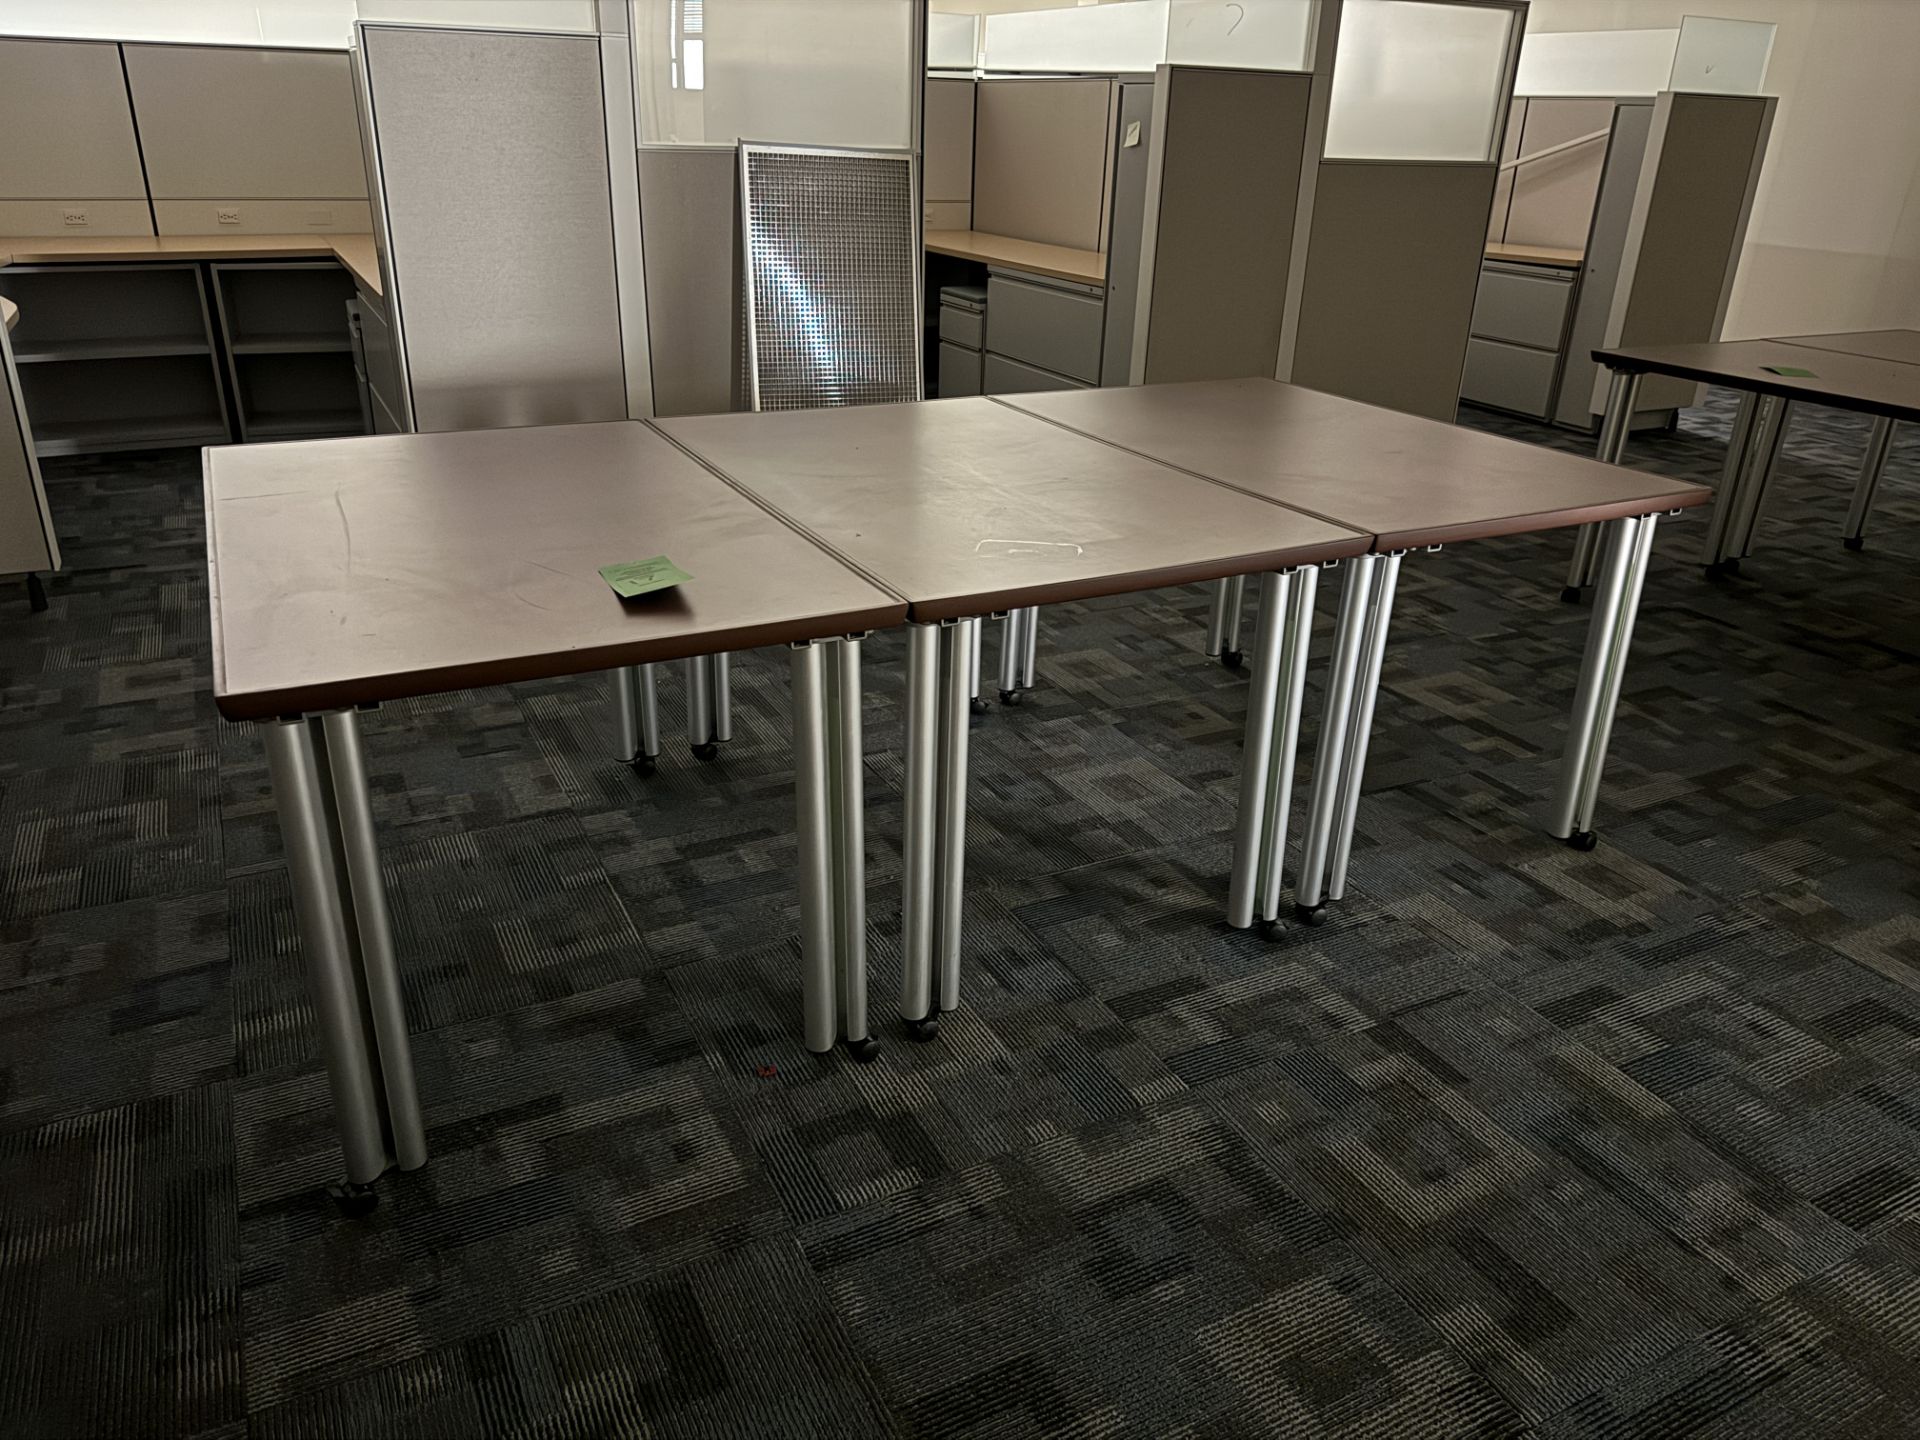 (3) CONNECTED OFFICE TABLES (ZONE 2)